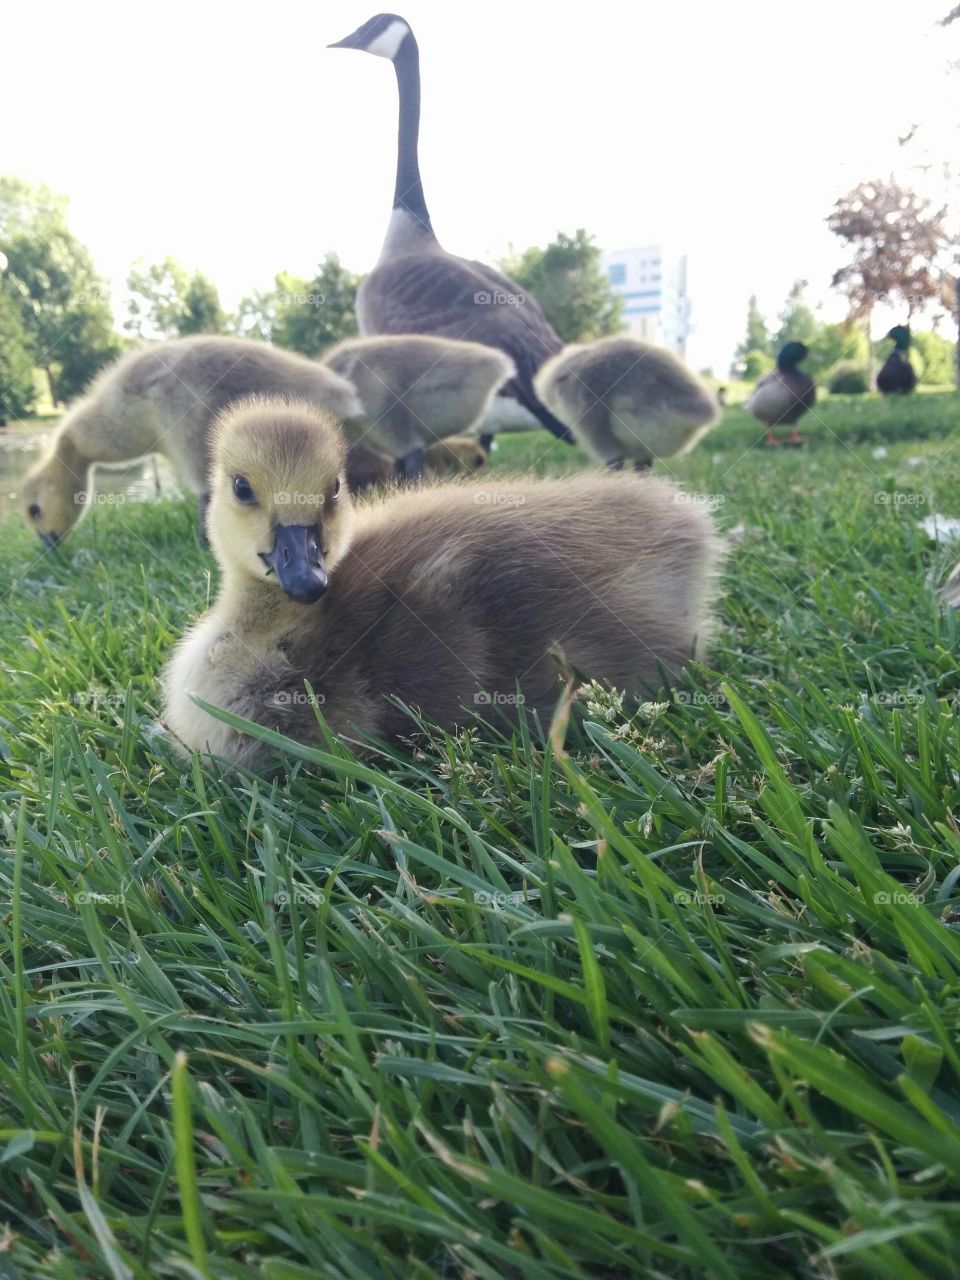 Baby goose in the foreground. baby goose among many birds